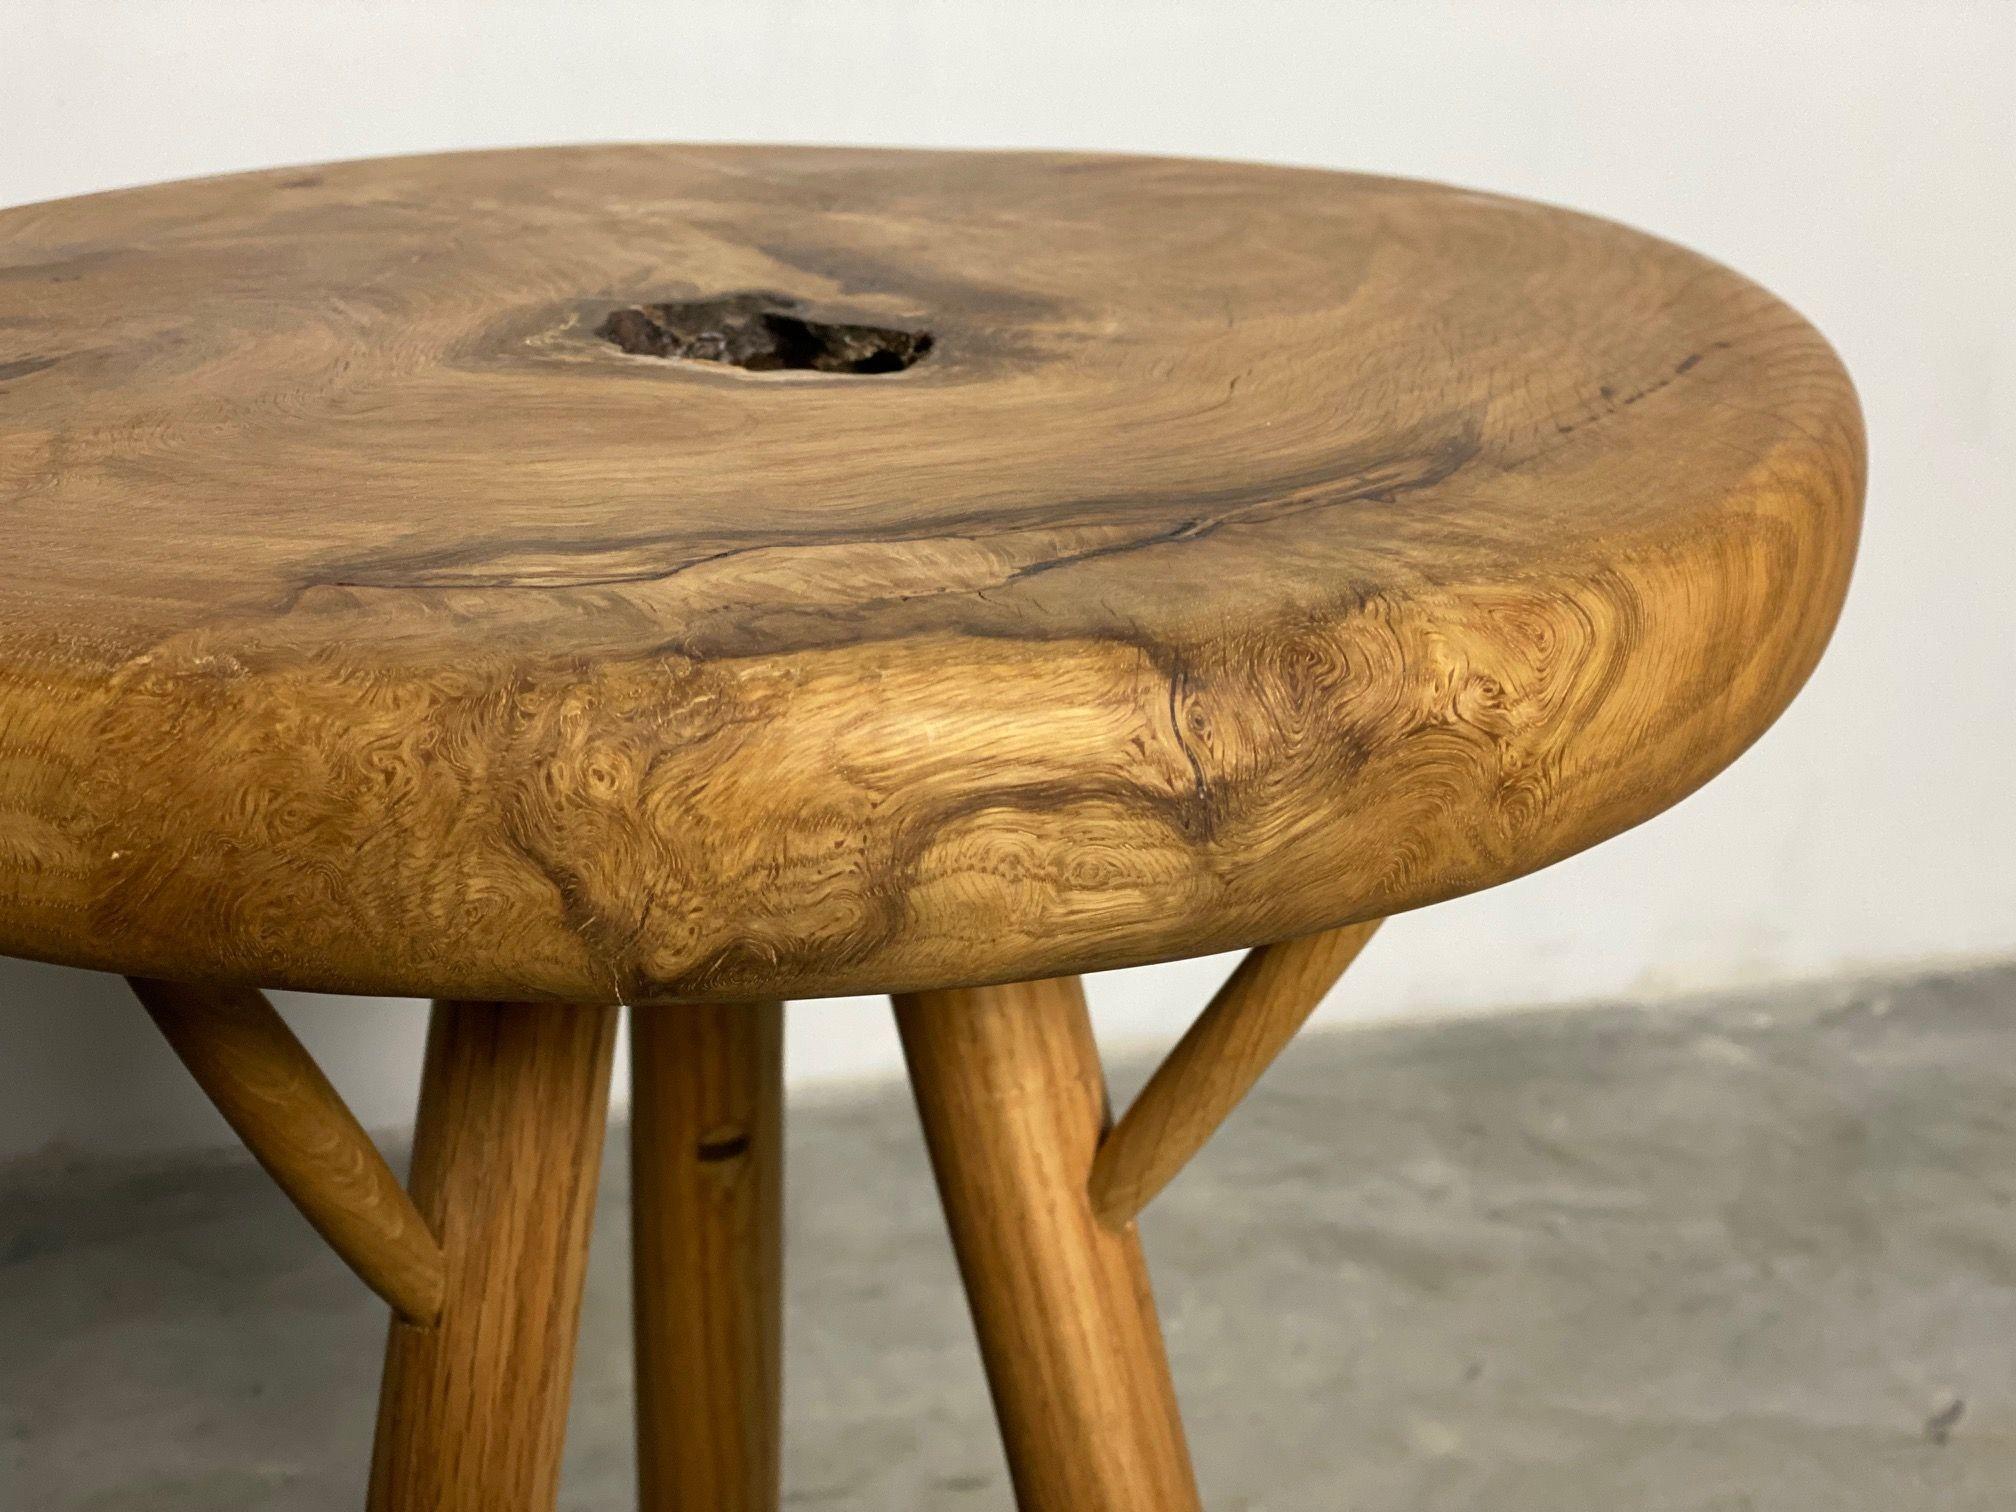 Hand-Crafted White Oak Burl Table by Michael Rozell, USA, 2021 For Sale 2